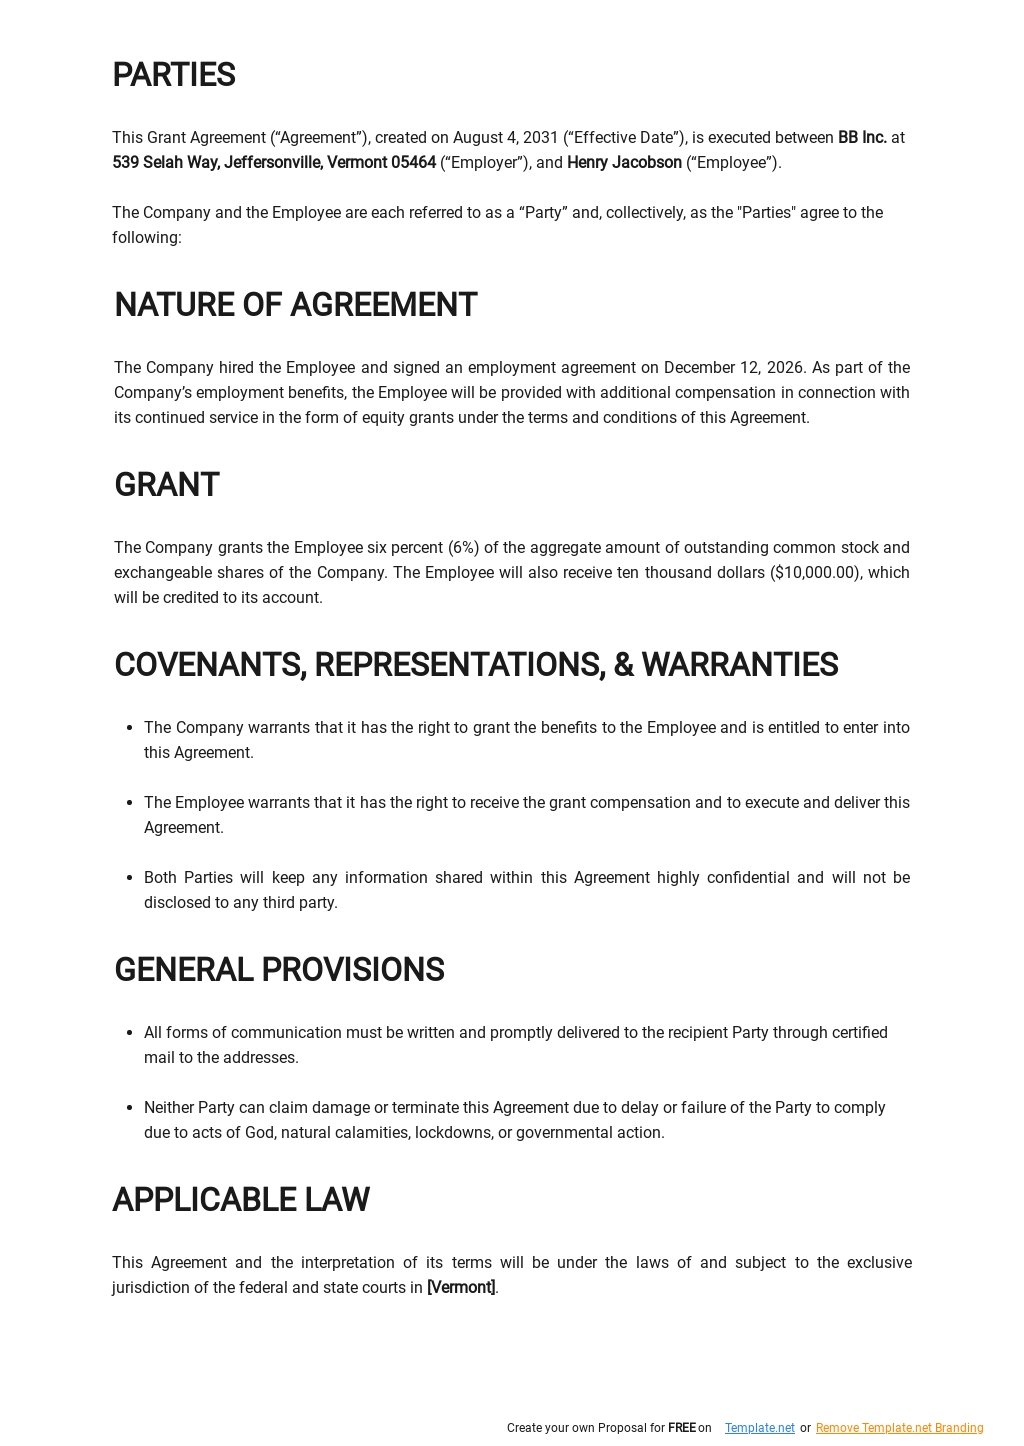 FREE Sample Grant Agreement Template in Google Docs Word Template net